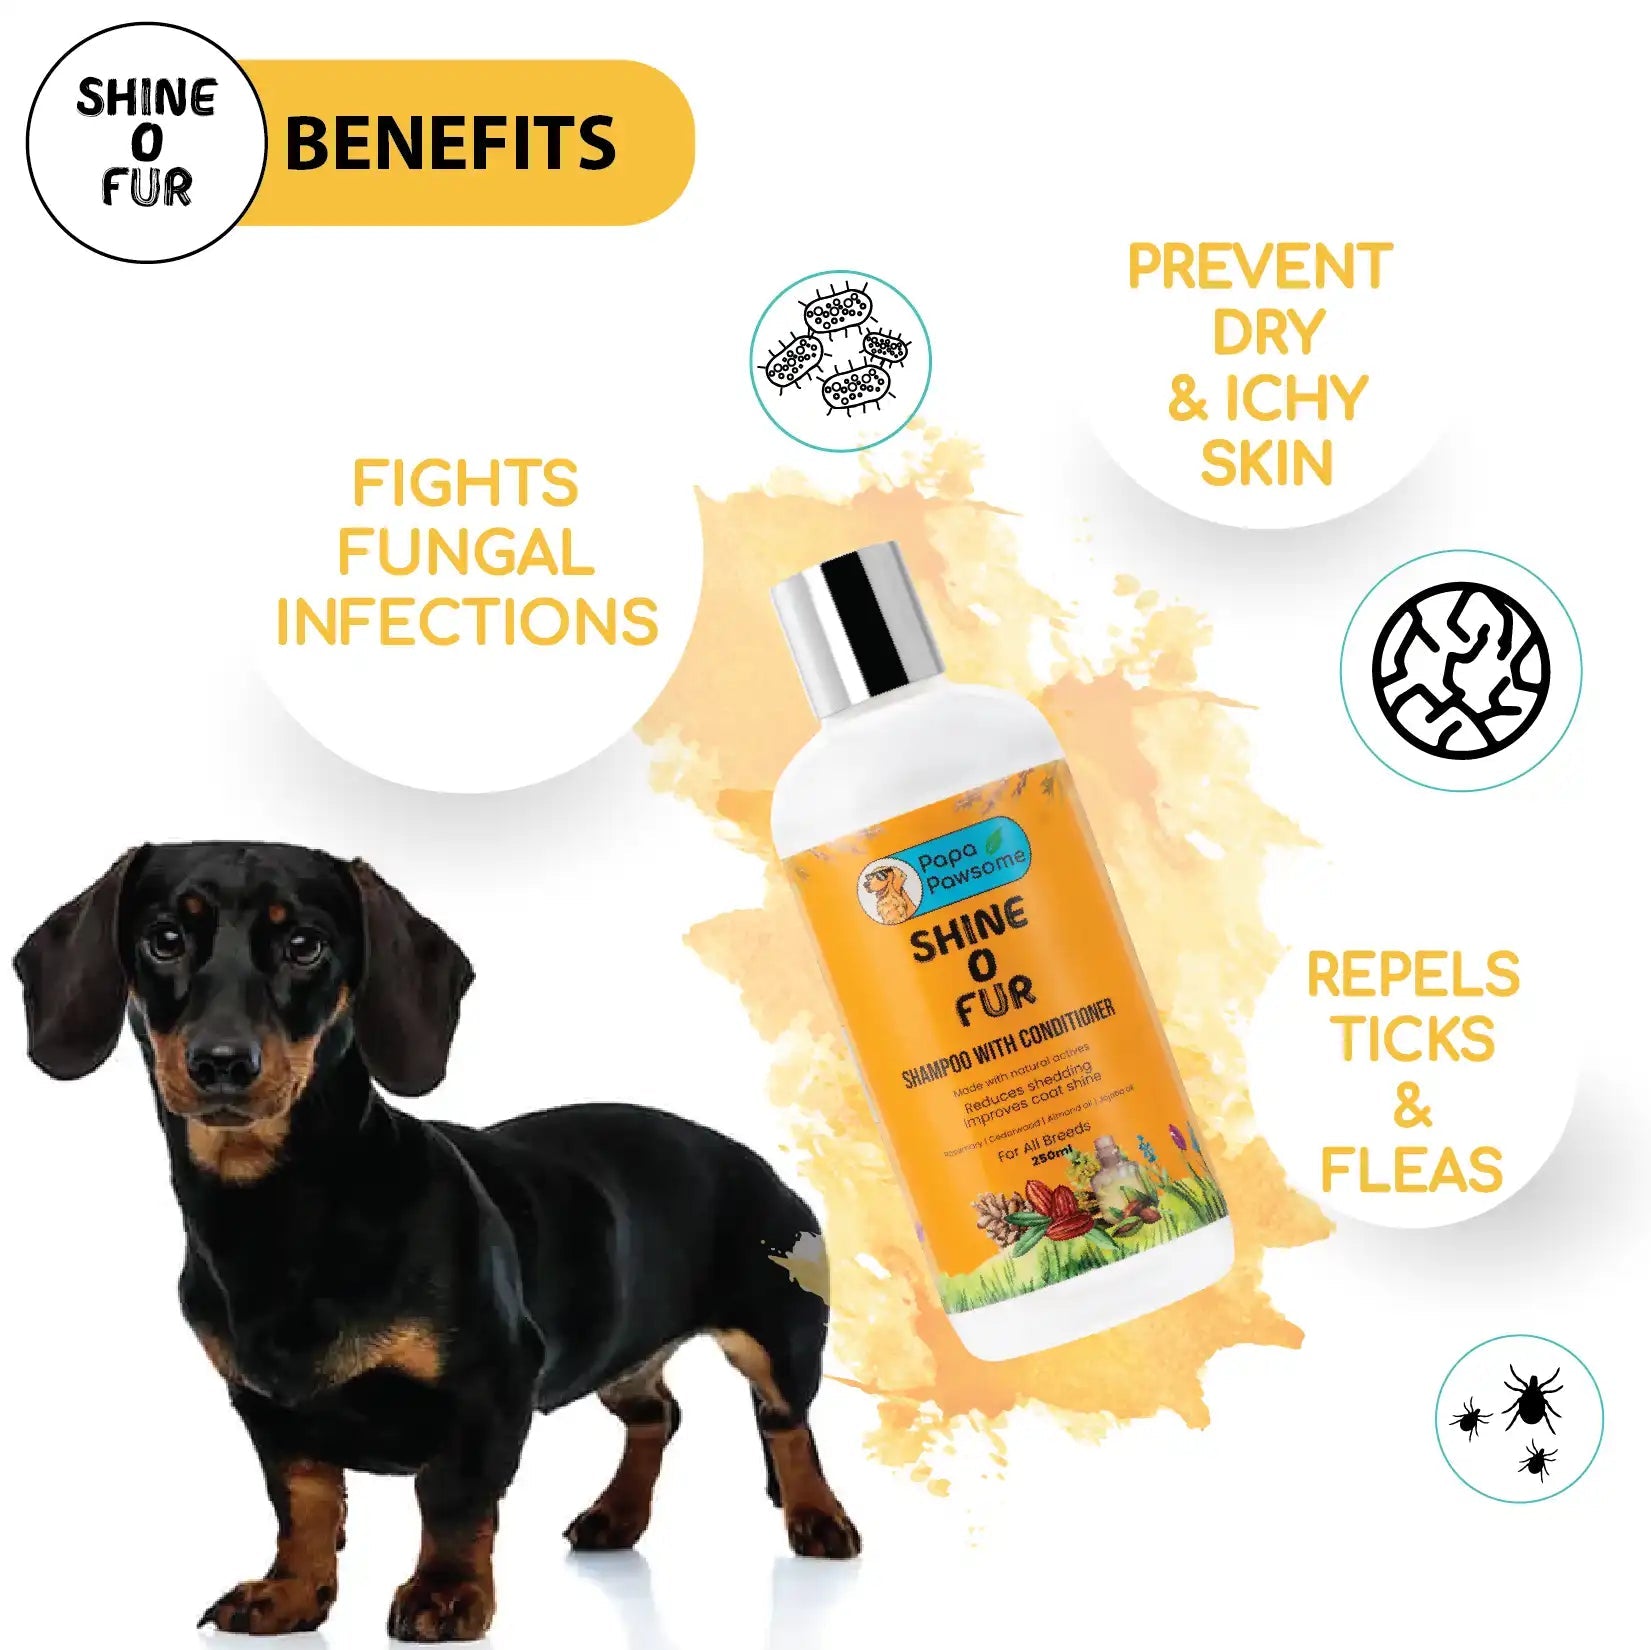 Dachshund Complete Grooming kit - Papa Pawsome